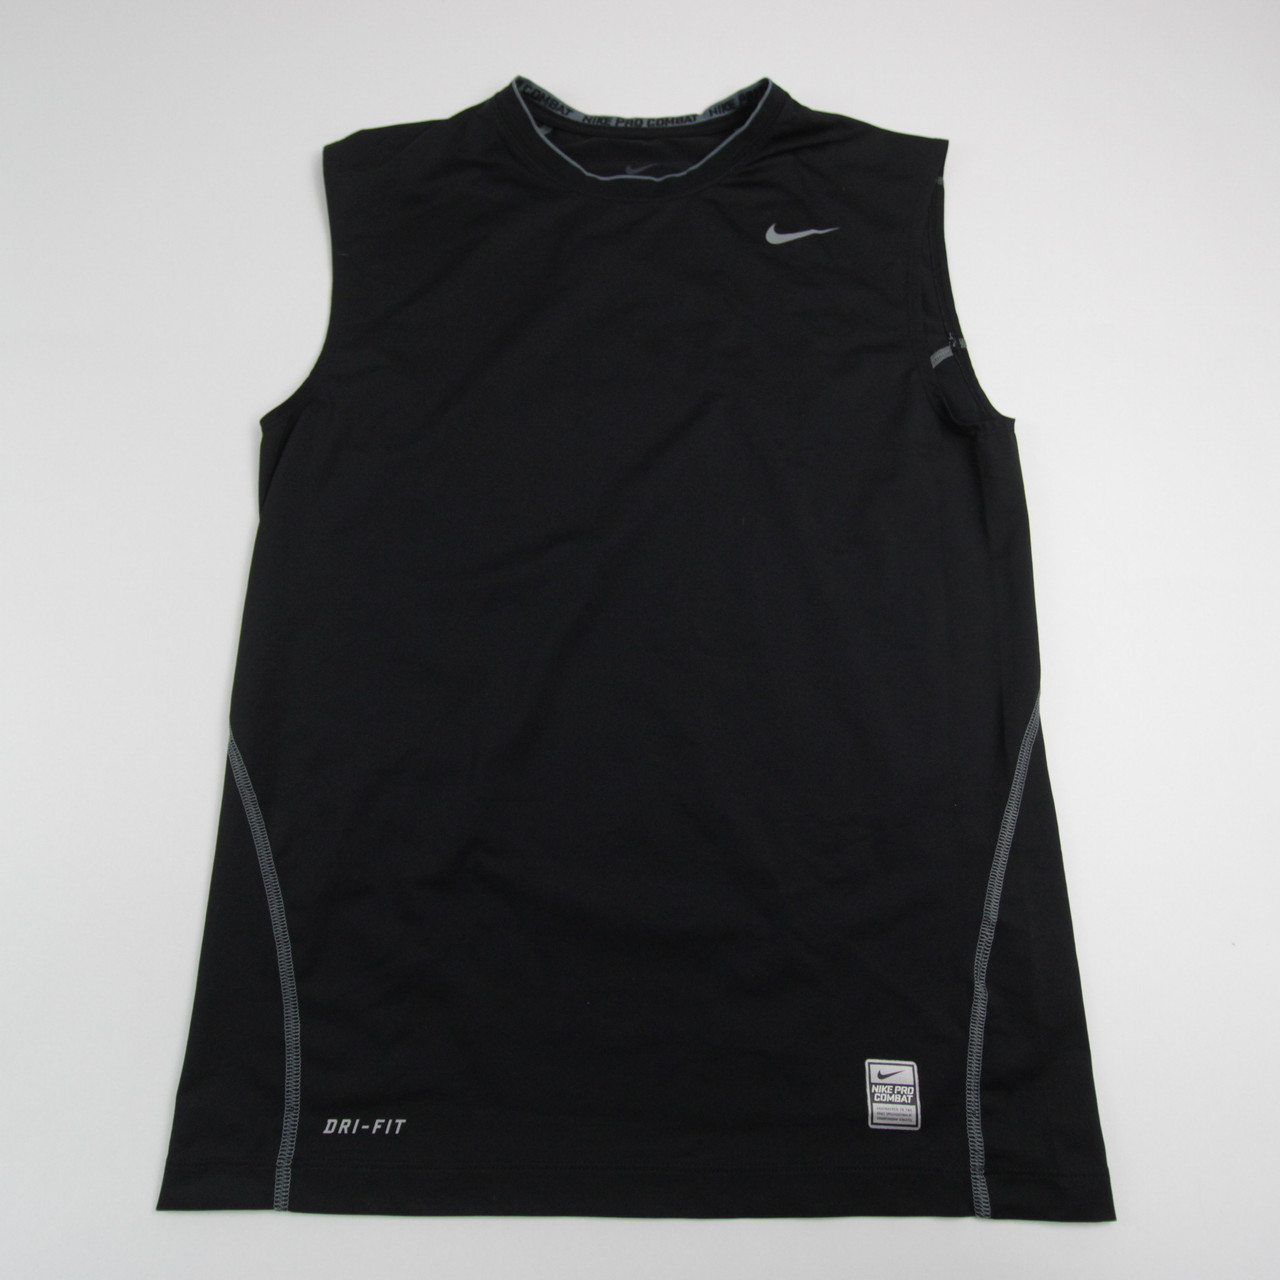 Nike Pro Compression Top Men's Black New without Tags 2XL 735